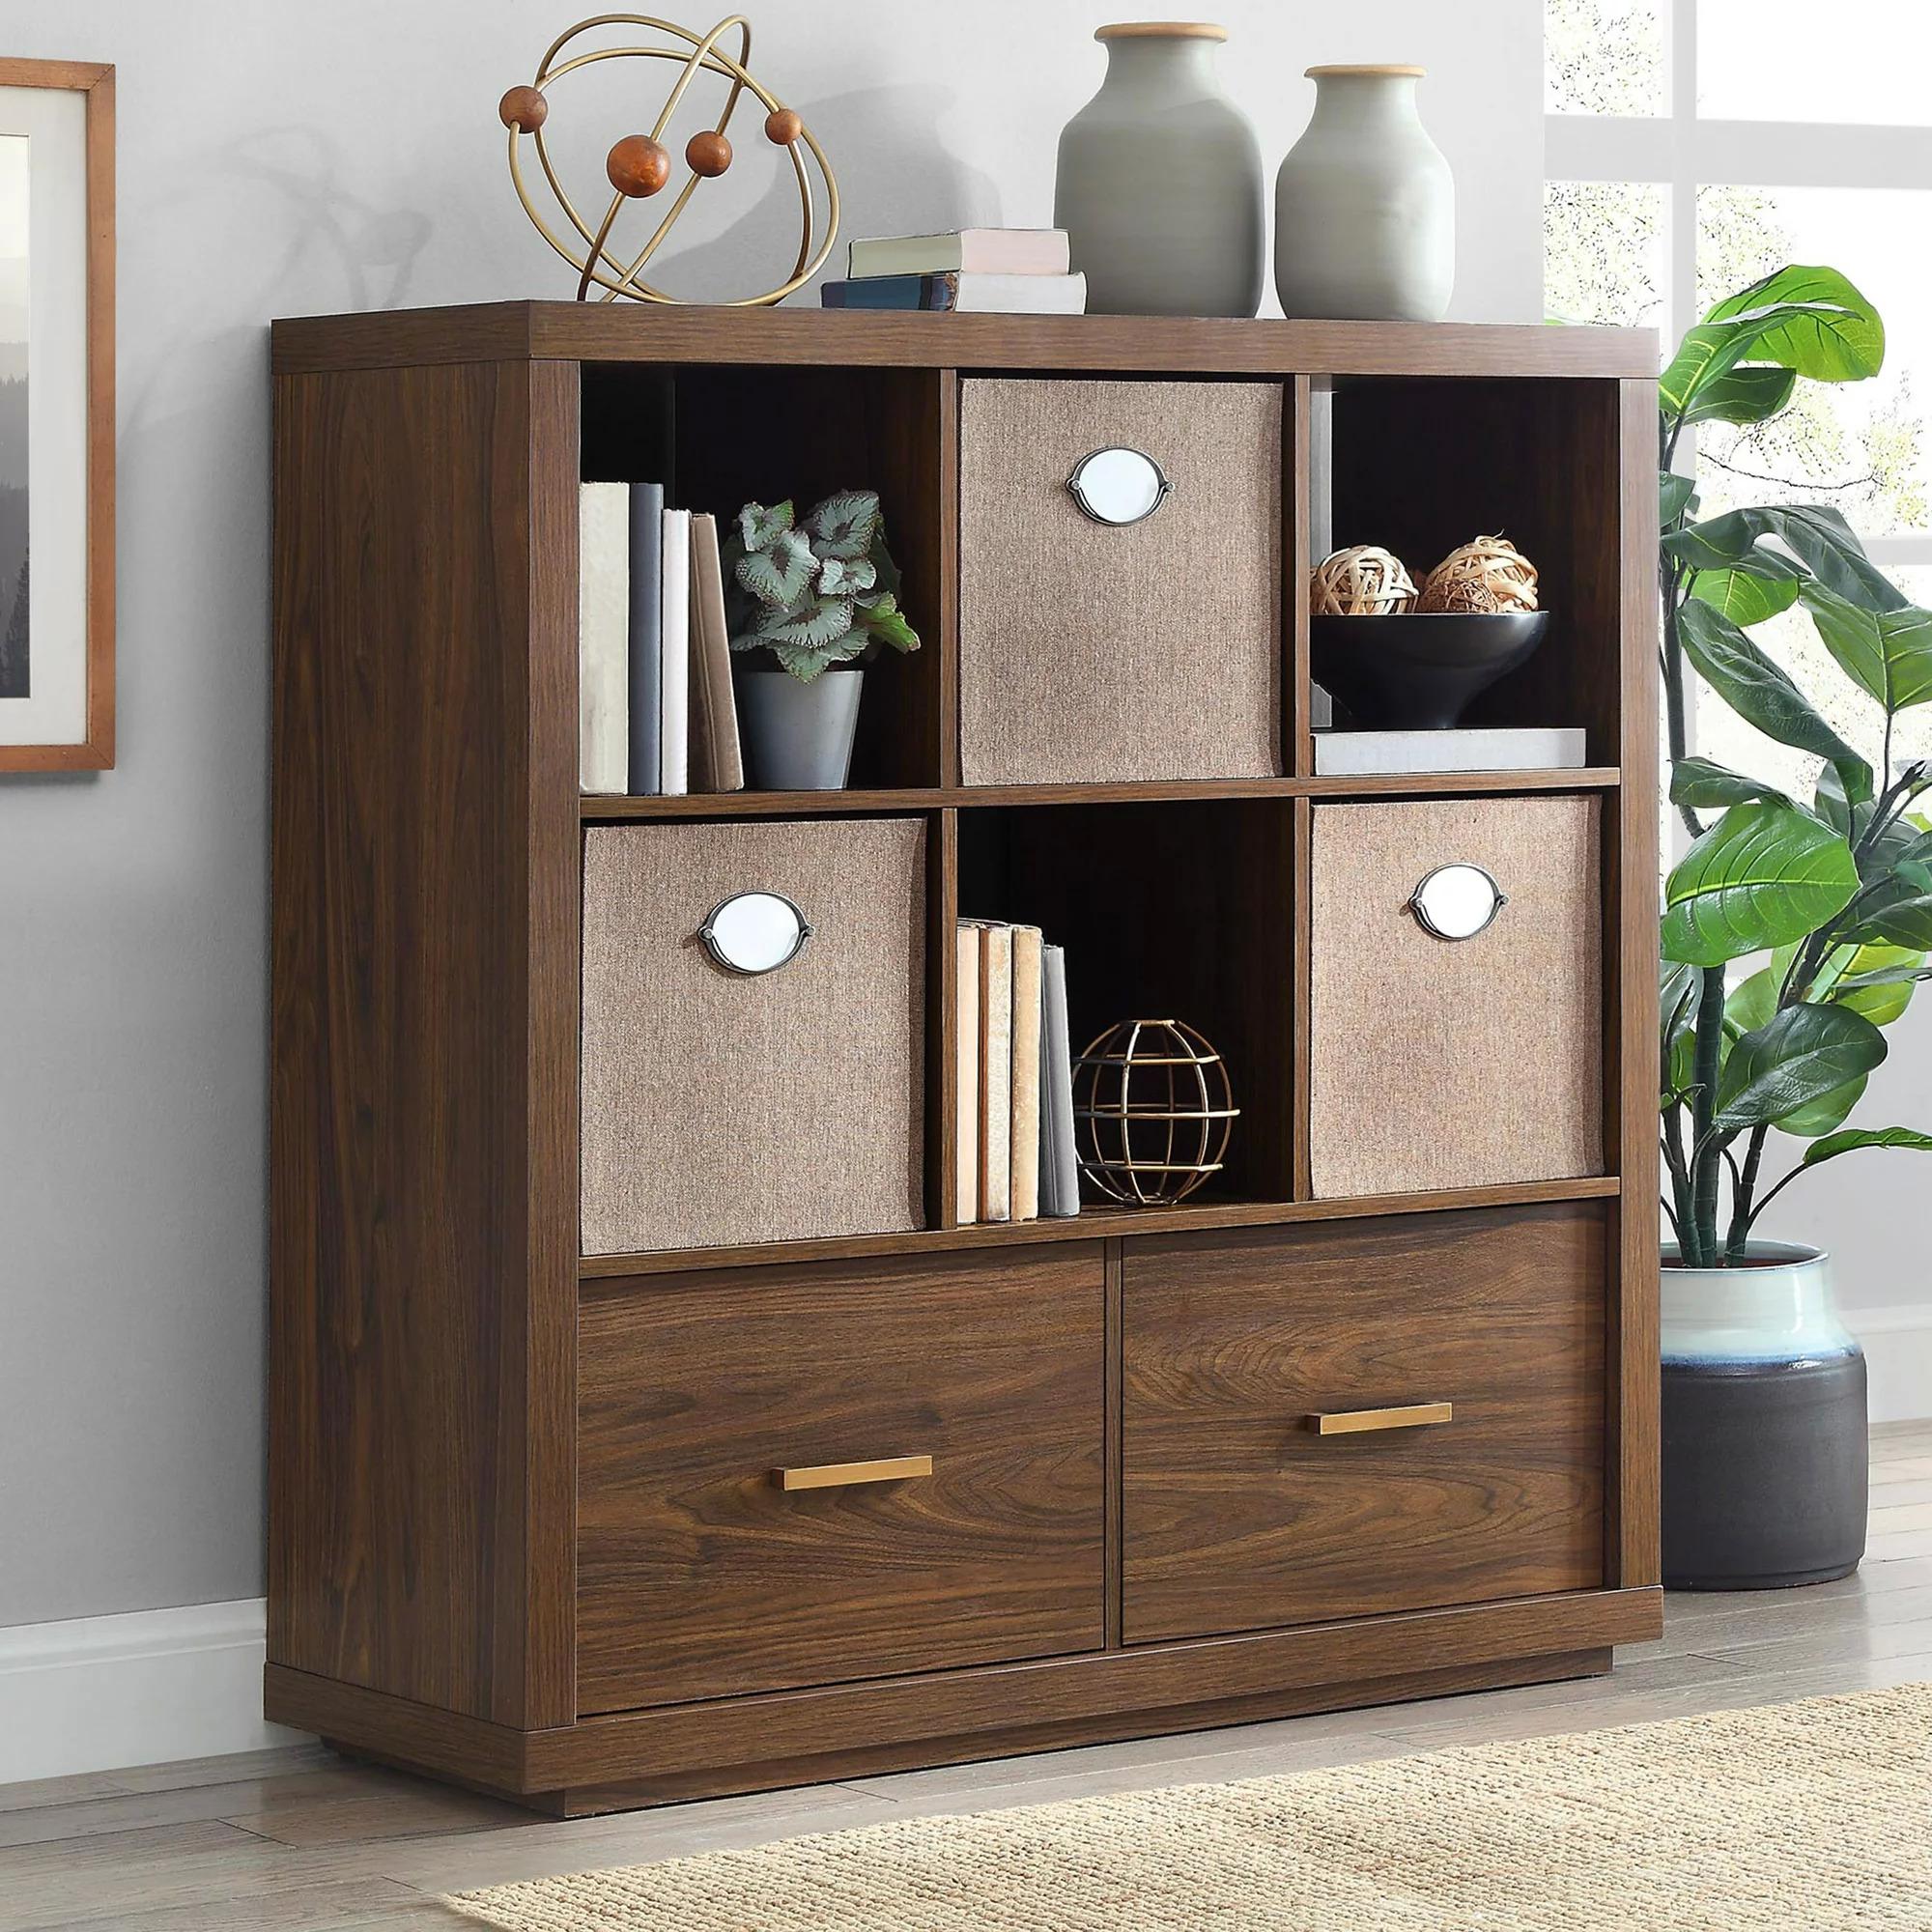 Better Homes and Gardens Steele 6 Cube Wooden Bookcase for $119 Shipped